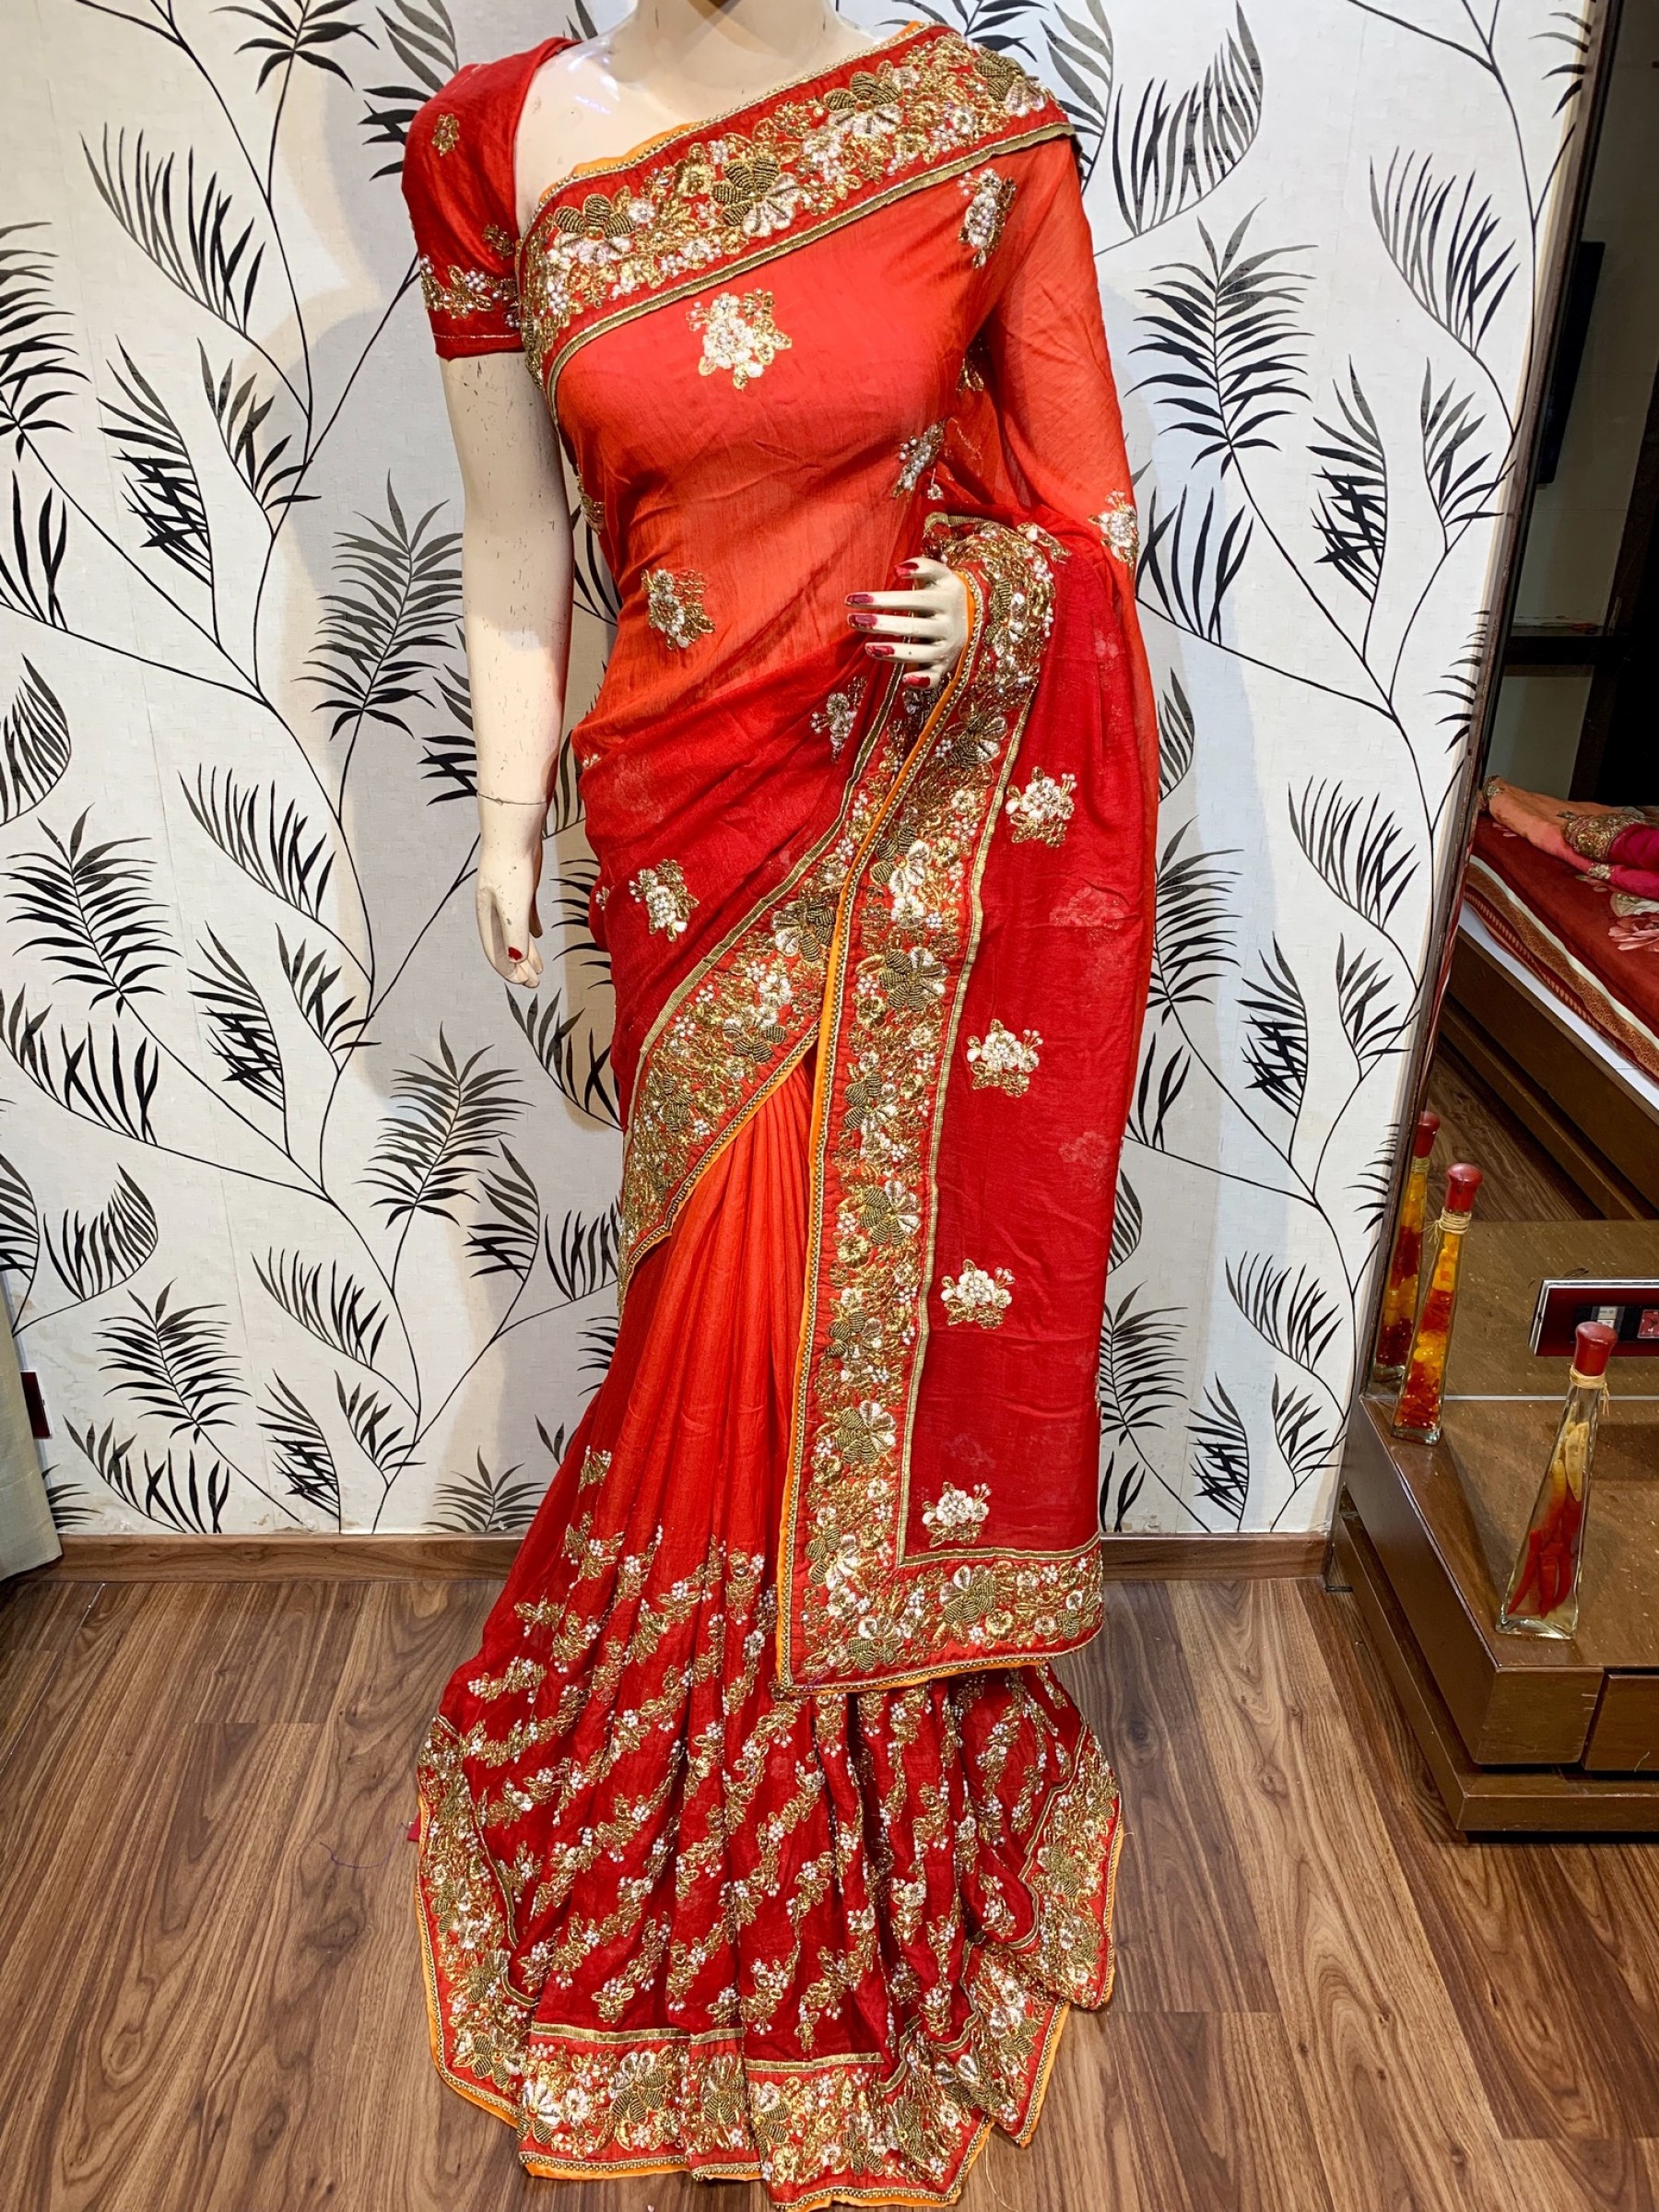 Geroo Jaipur Pink & White Floral Mukaish Pure Chiffon Heavy Work Saree  Price in India, Full Specifications & Offers | DTashion.com